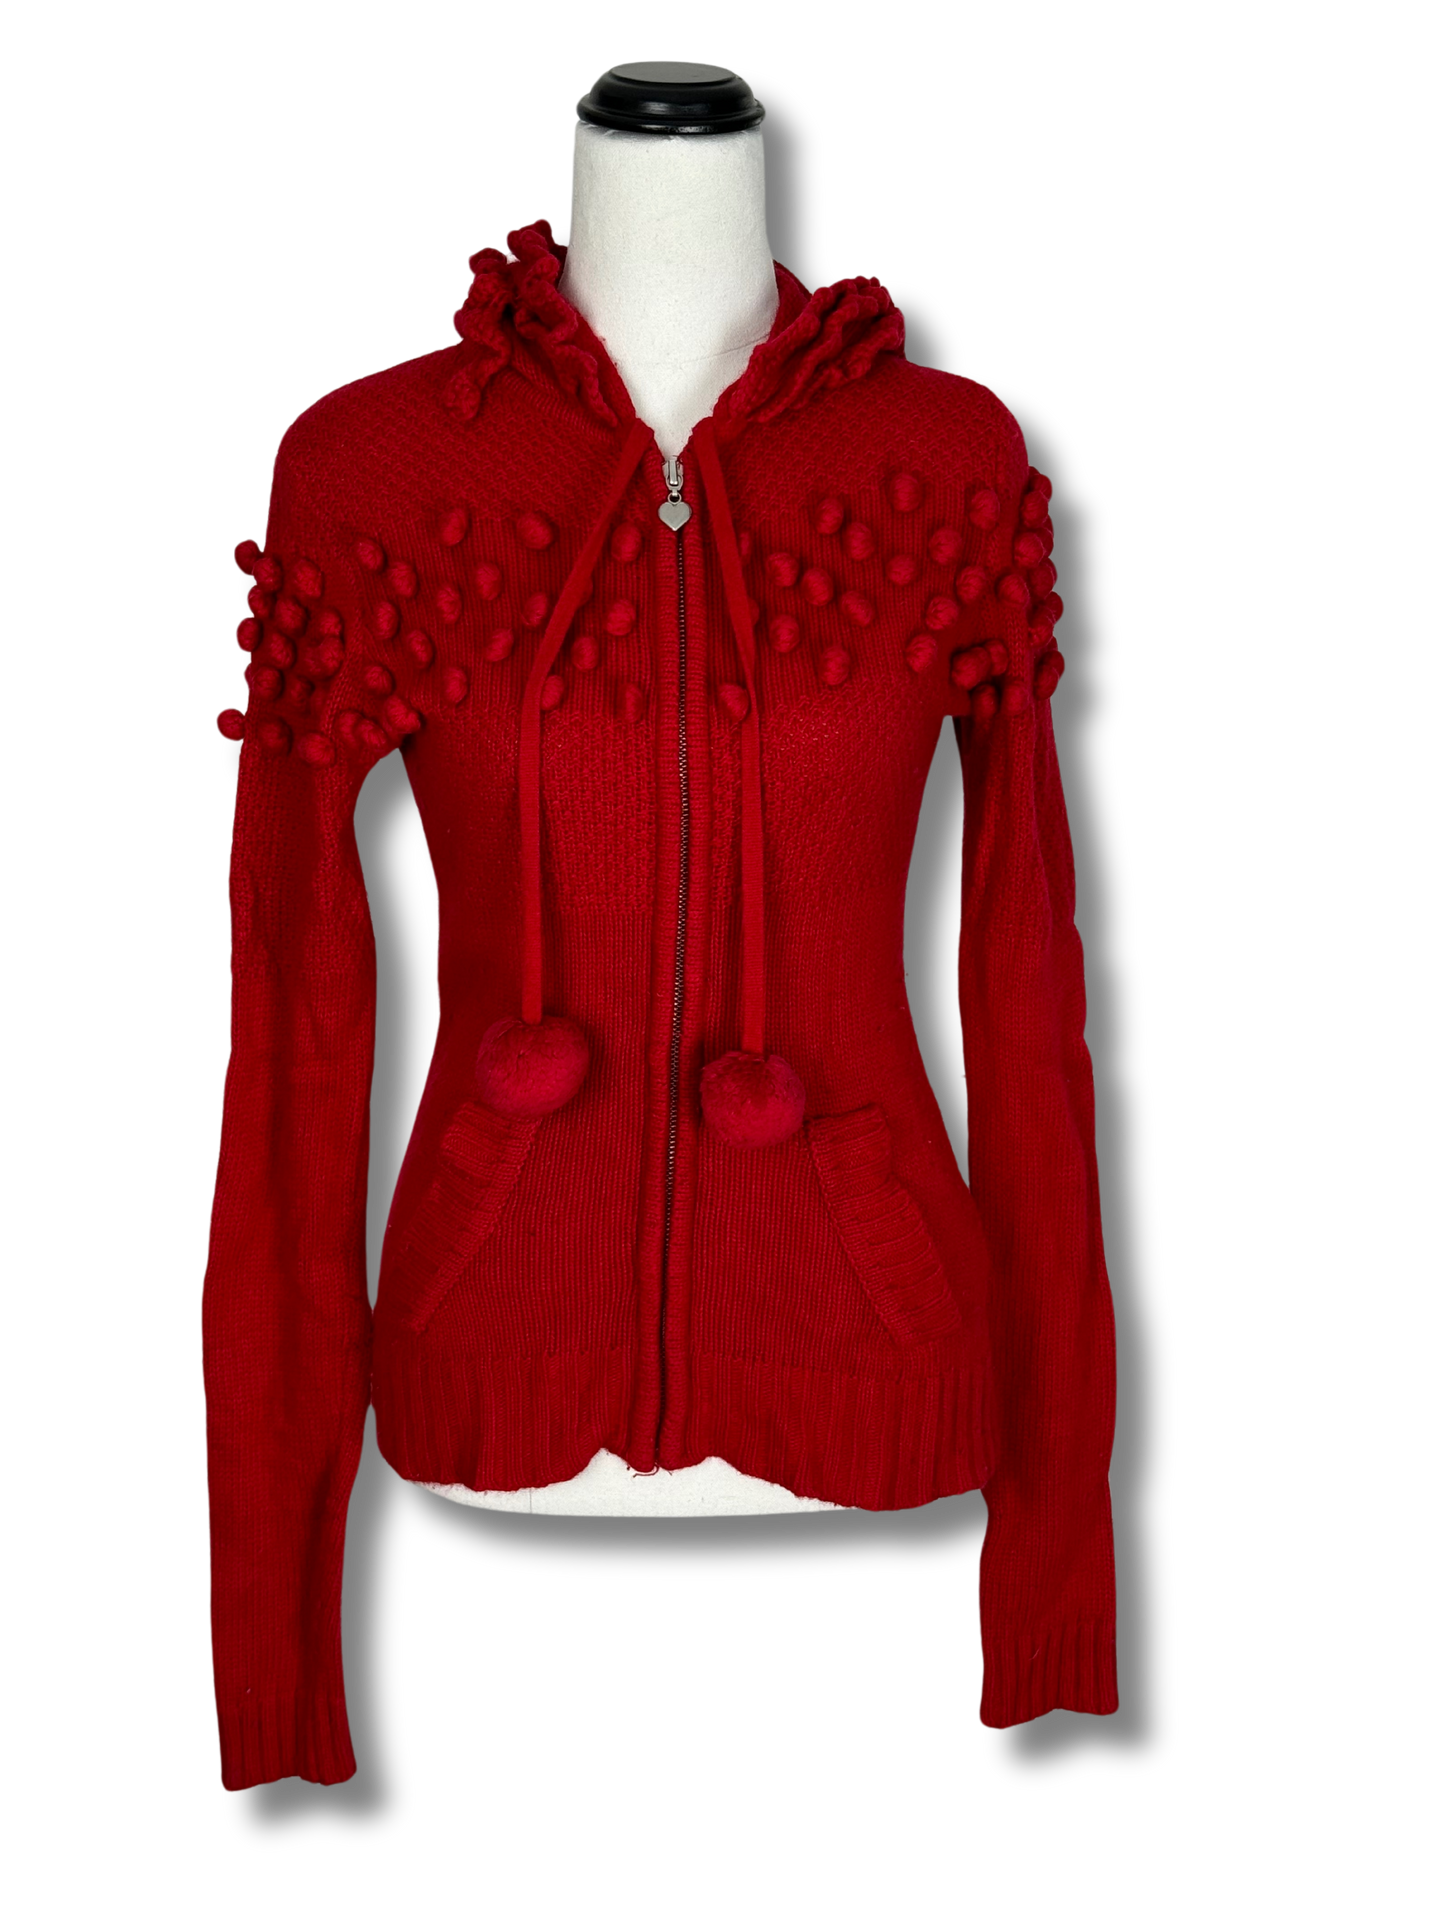 Alannah Hill Red Cardigan with Hood and Pom Poms